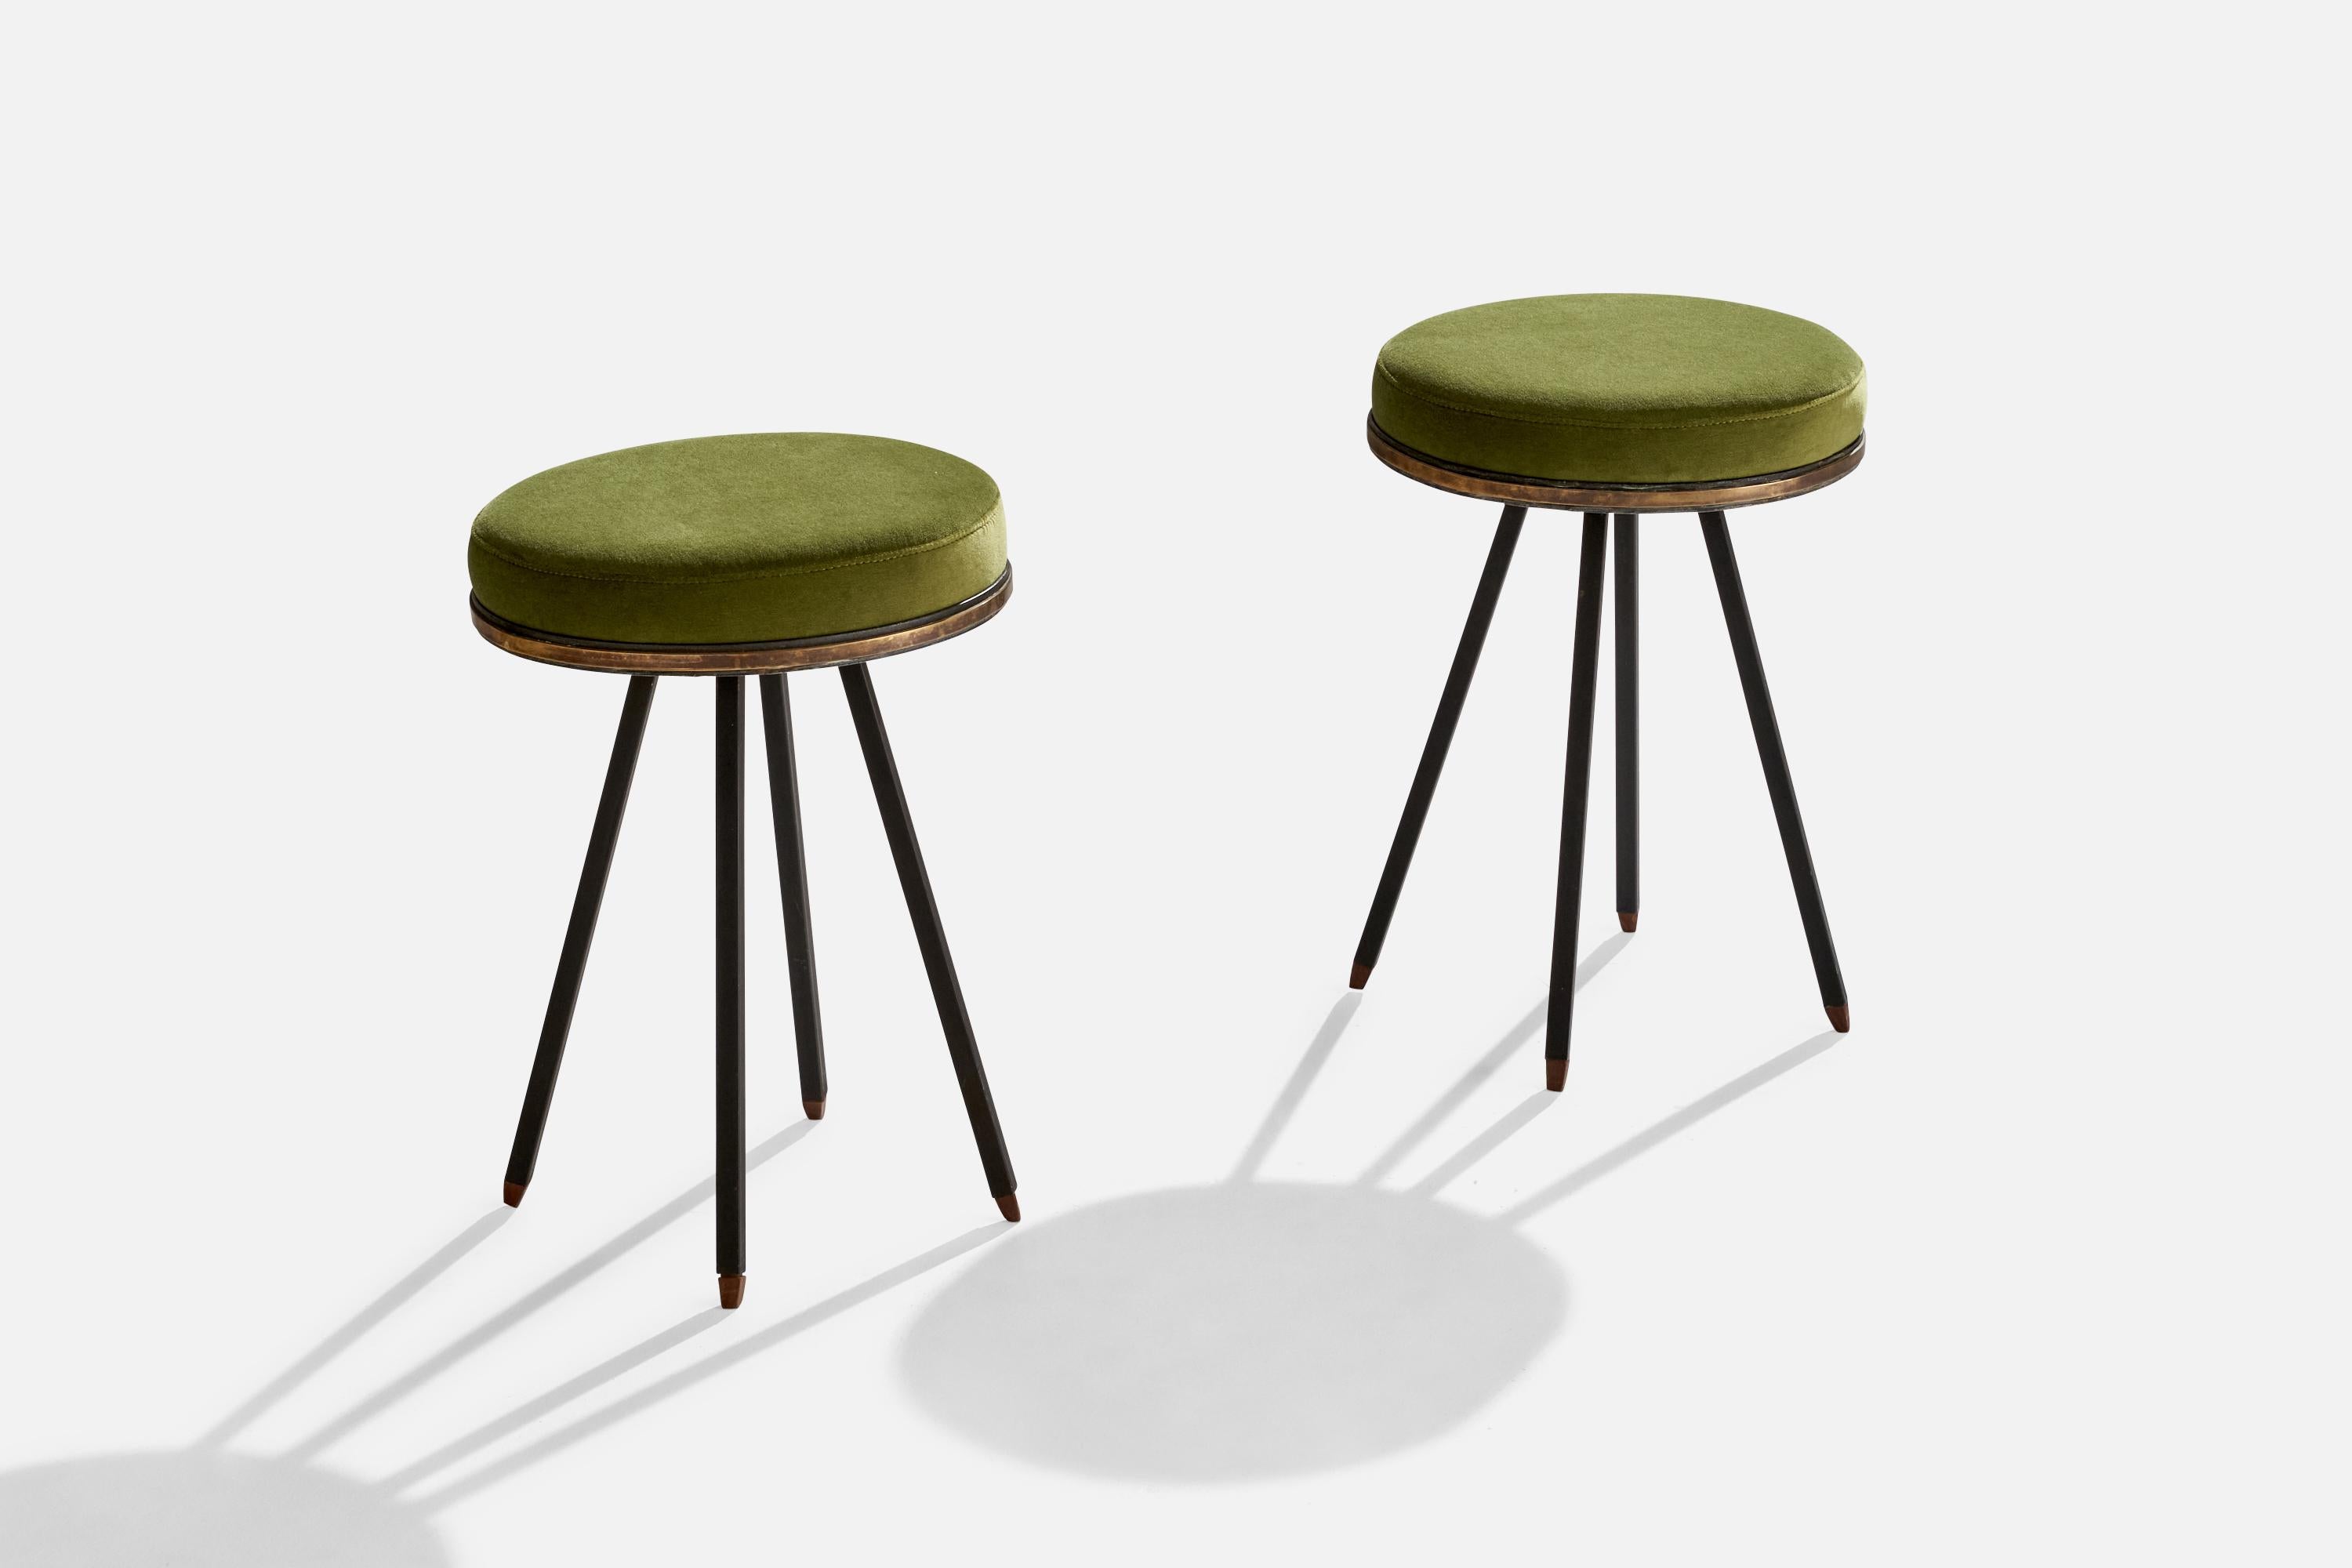 A pair of brass, black-lacquered metal and green velvet stools designed and produced in Italy, 1940s.

Seat height: 18.25”